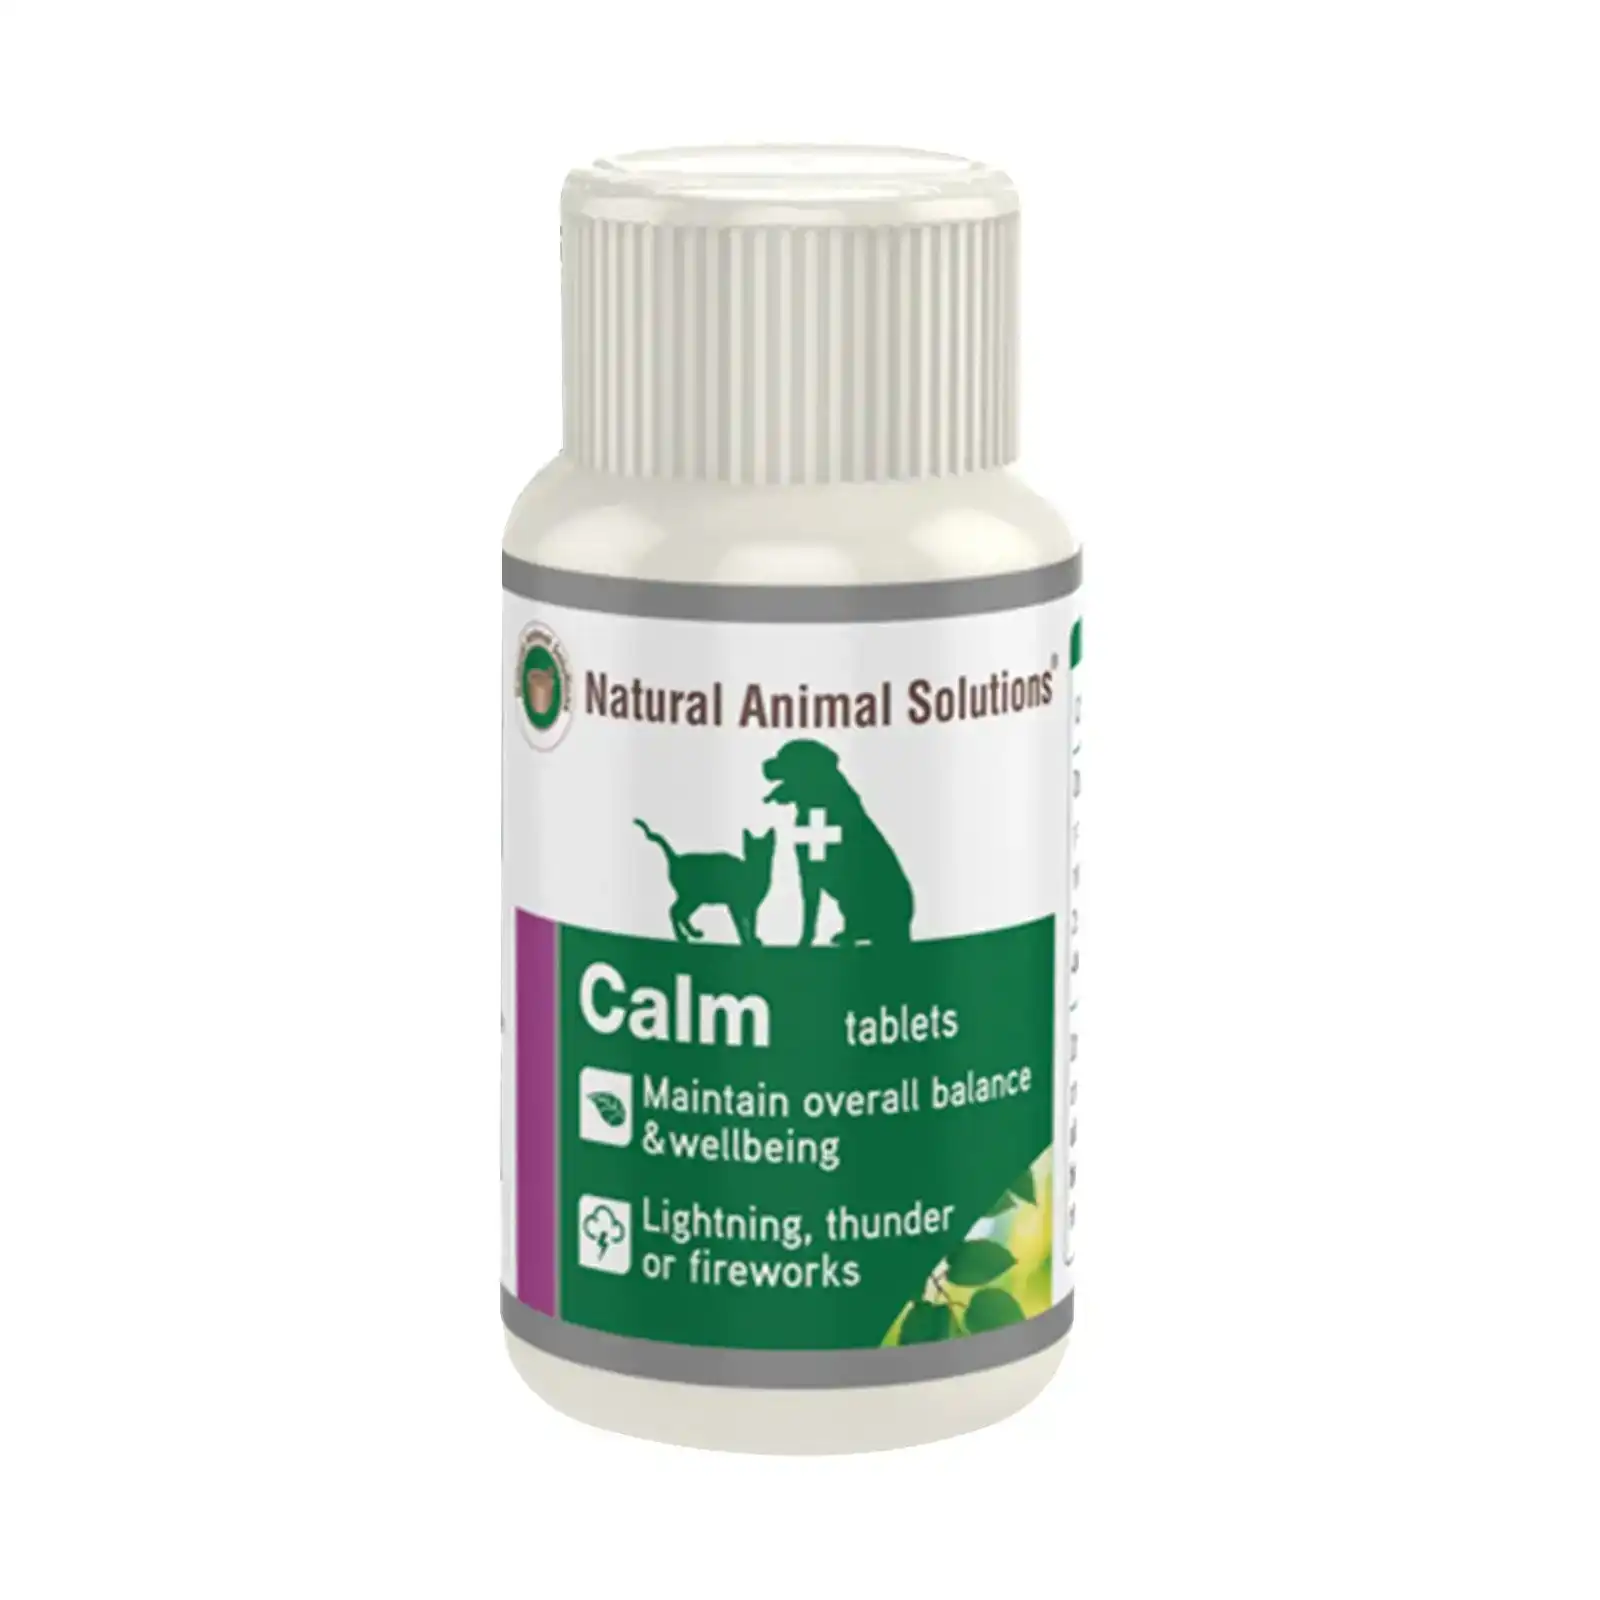 Natural Animal Solutions Calm Tablets For Dogs & Cats 30 Tablets